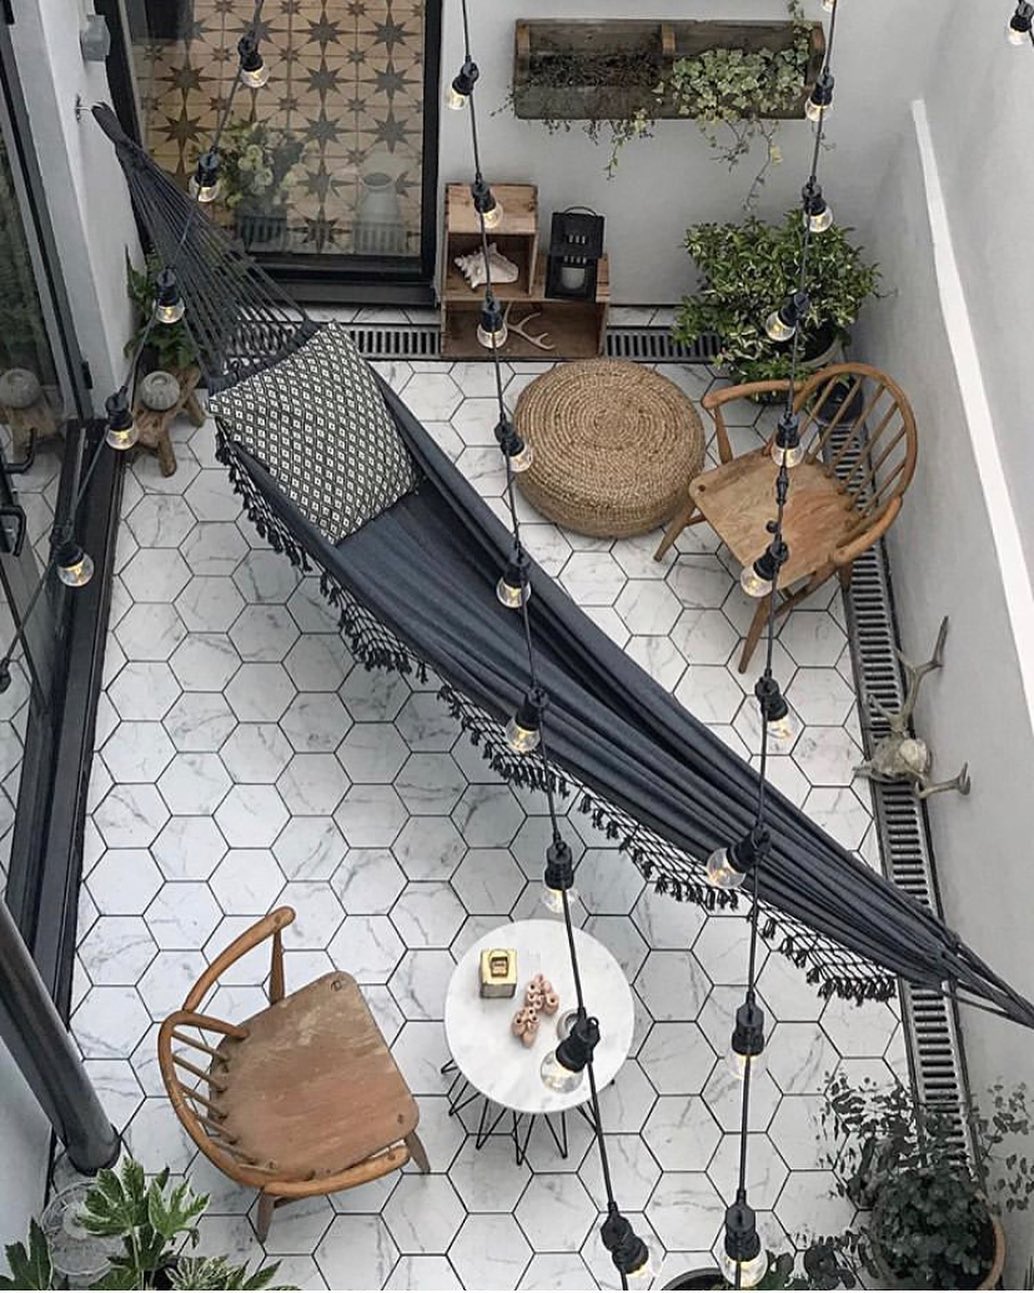 small patio with chairs and a hammock stretched across photo by Instagram user @ravenhawkdesigns